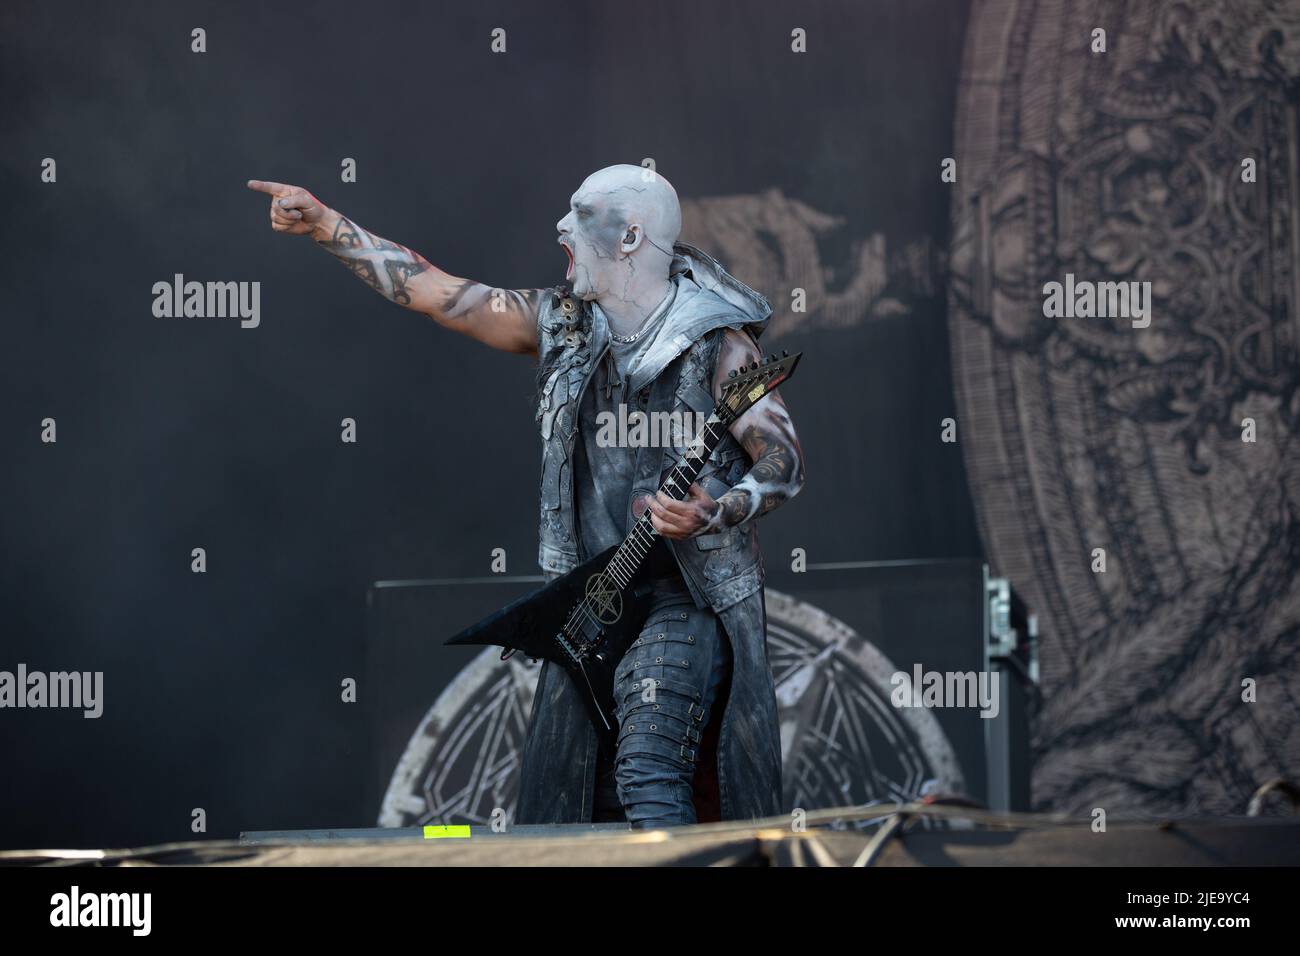 Oslo, Norway. 24th, June 2022. The Norwegian symphonic black metal band Dimmu Borgir performs a live concert during the Norwegian music festival Tons of Rock 2022 in Oslo. Here guitarist Galder is seen live on stage. (Photo credit: Gonzales Photo - Per-Otto Oppi). Stock Photo